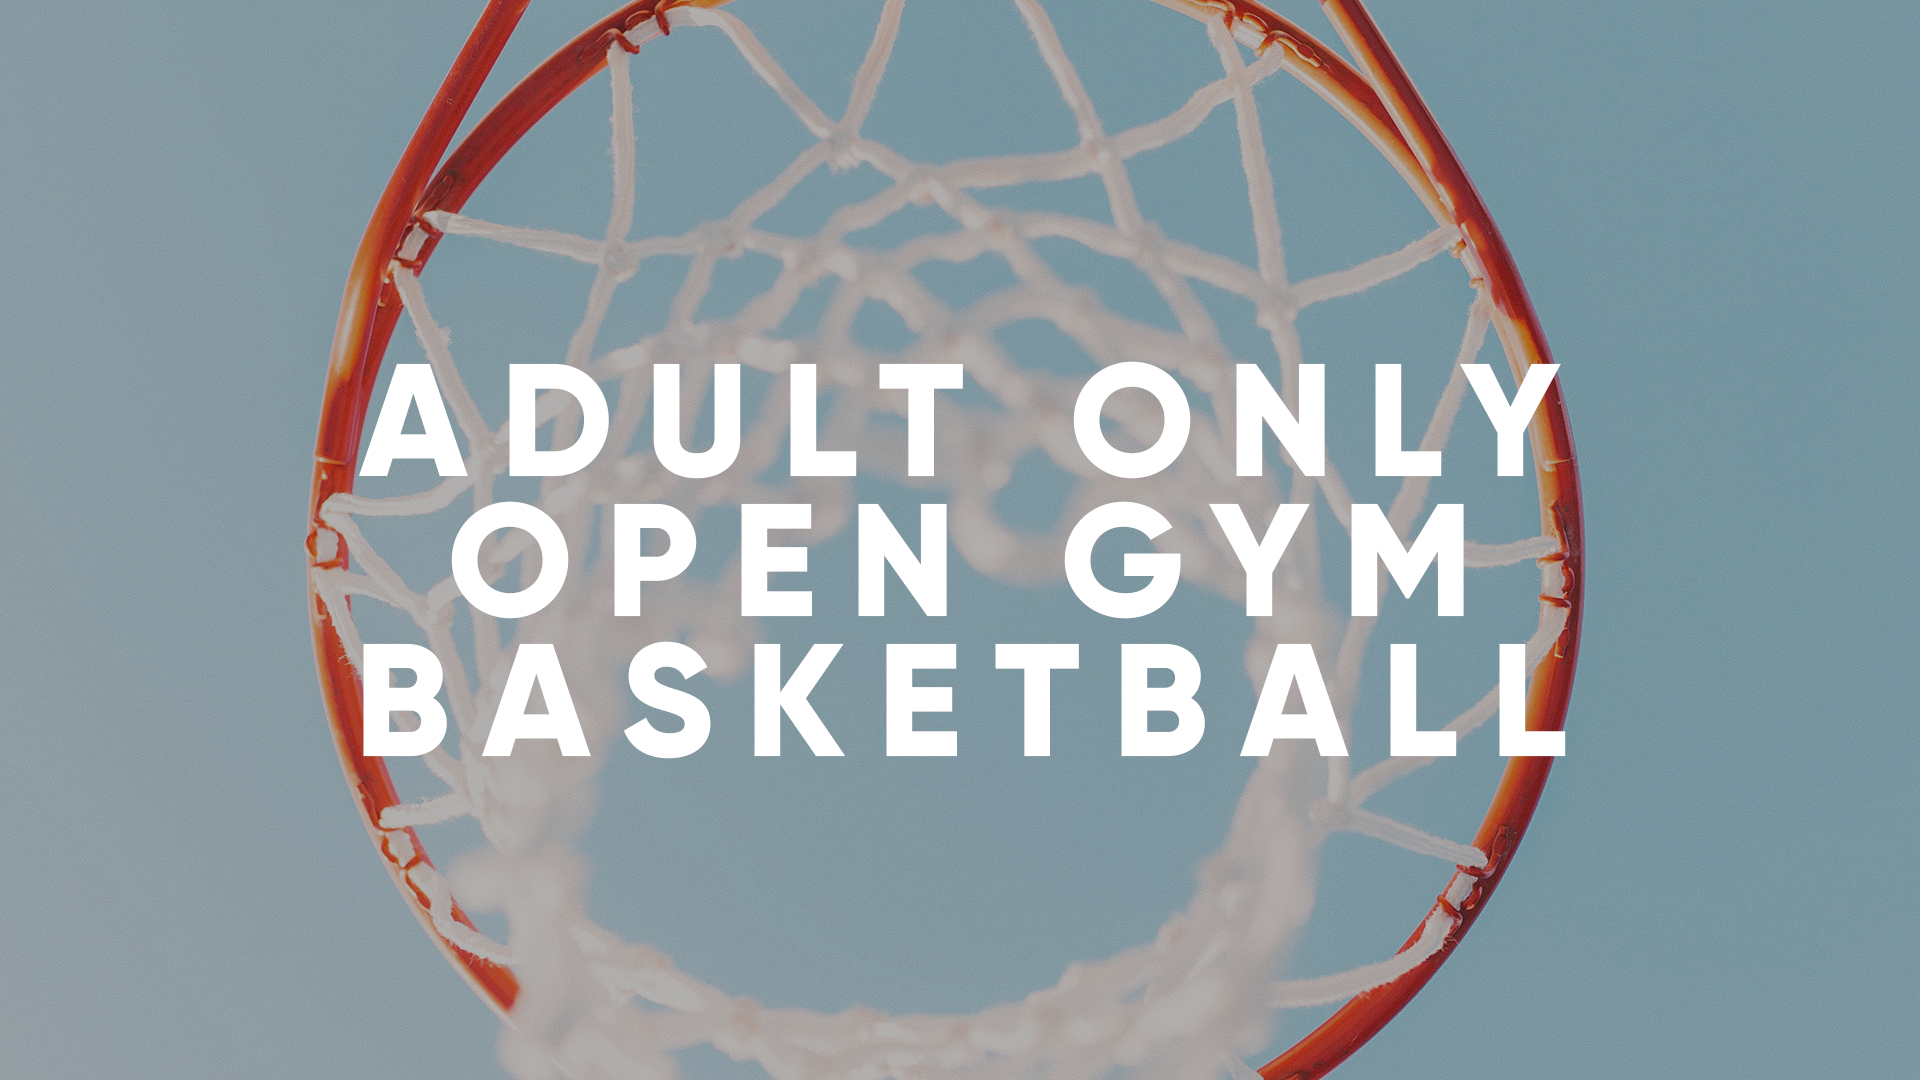 Adult Only Open Gym Basketball